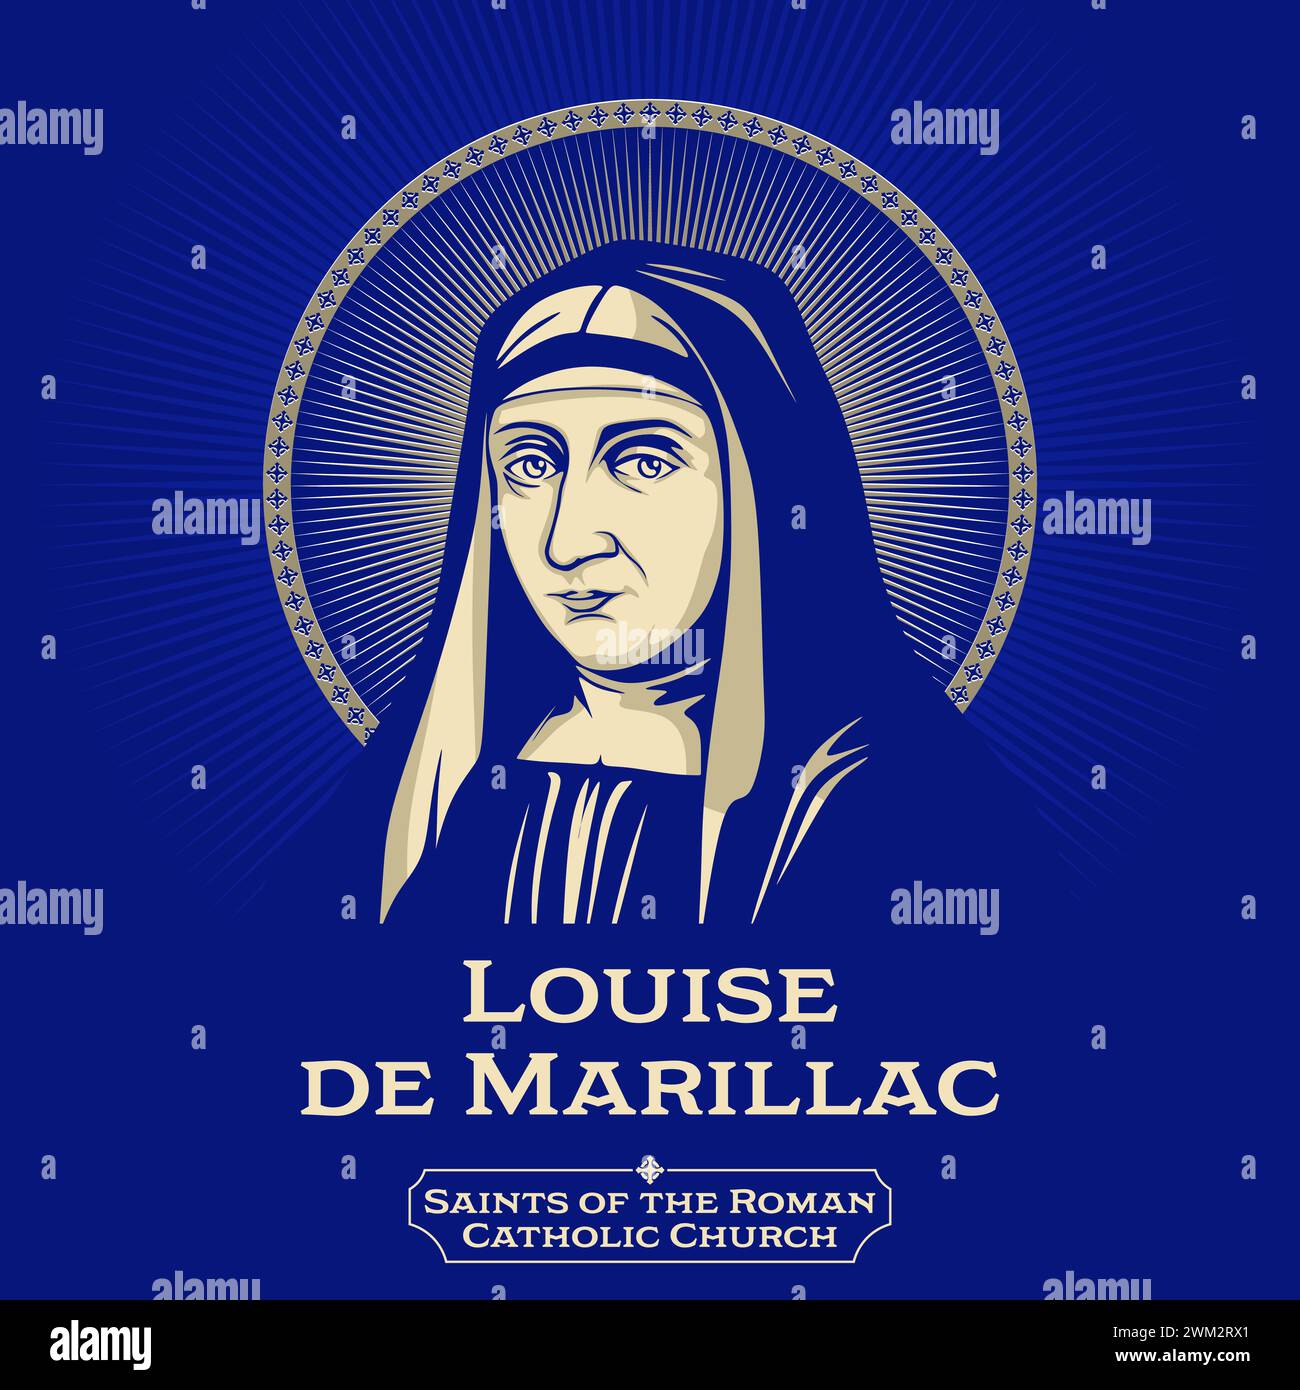 Saints of the Catholic Church. Louise de Marillac (1591-1660) was the co-founder, with Vincent de Paul, of the Daughters of Charity. Stock Vector